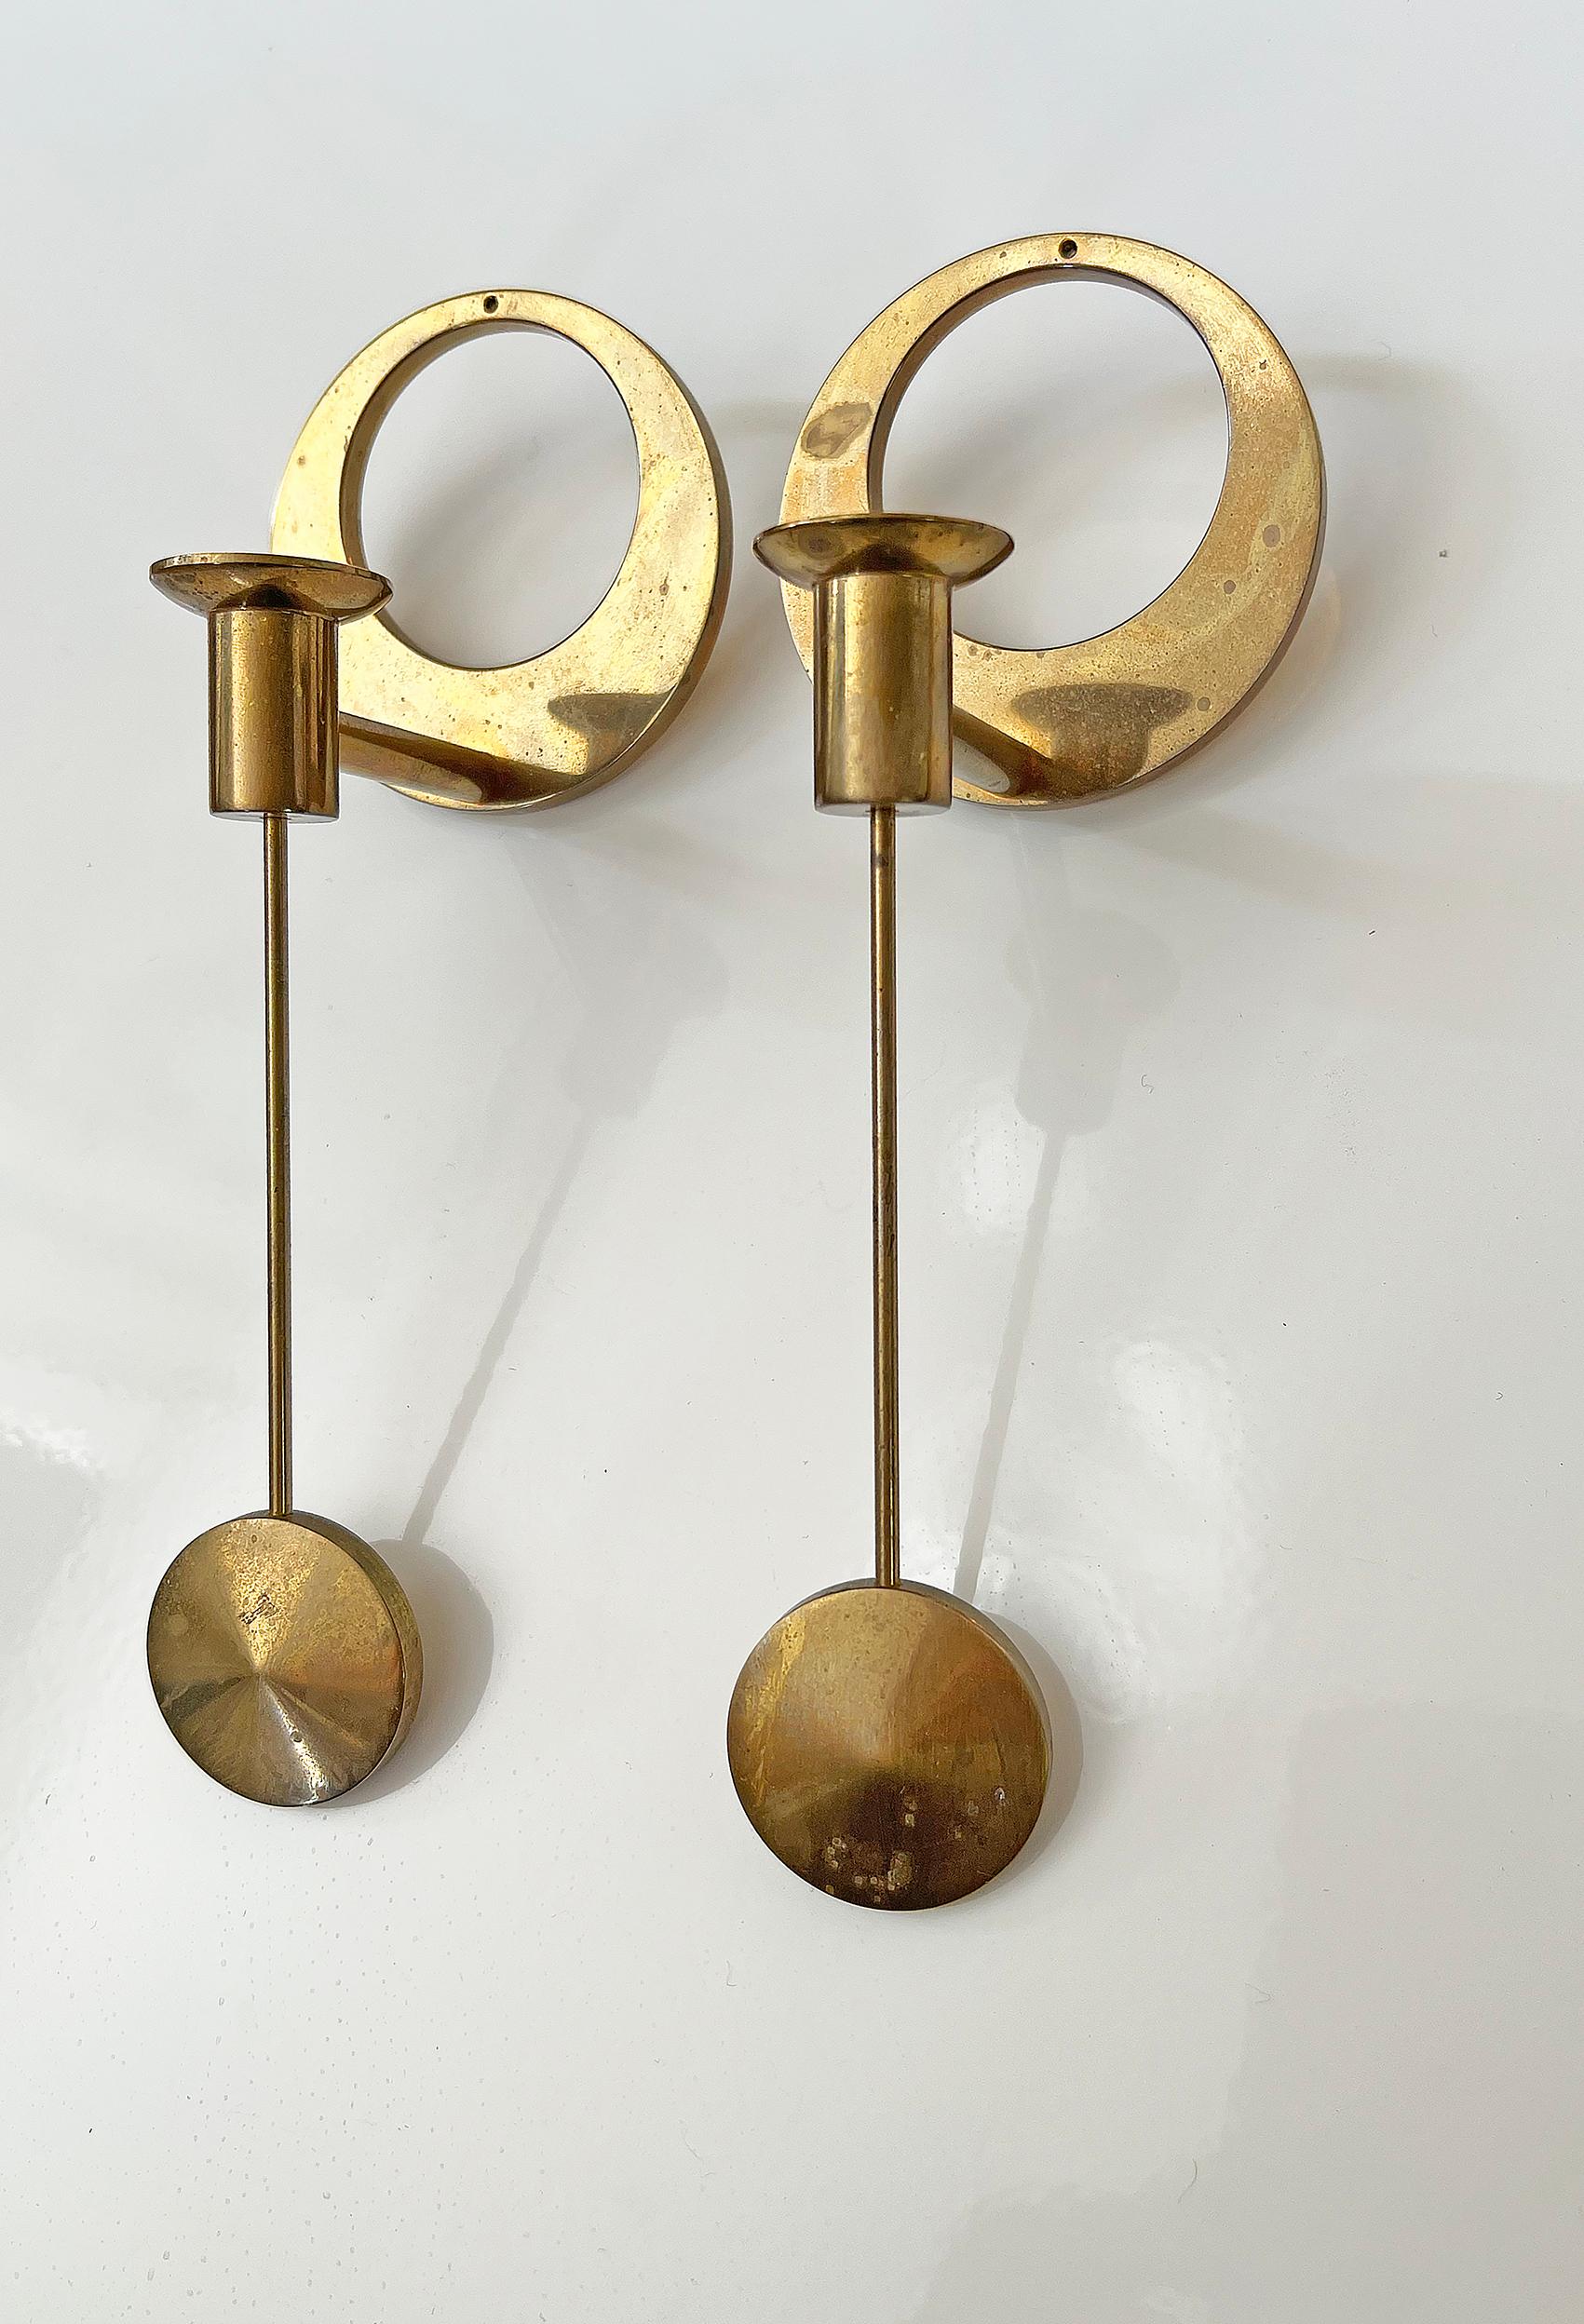 Beautiful wall hanged candlesticks in brass, designed by Arthur Pe ca 1950's. 
Produced by his own studio Kolbäck in Sweden.
Signed with makers mark.
Good vintage condition, wear and patina consistent with age and use. 
Brass patina and small rust